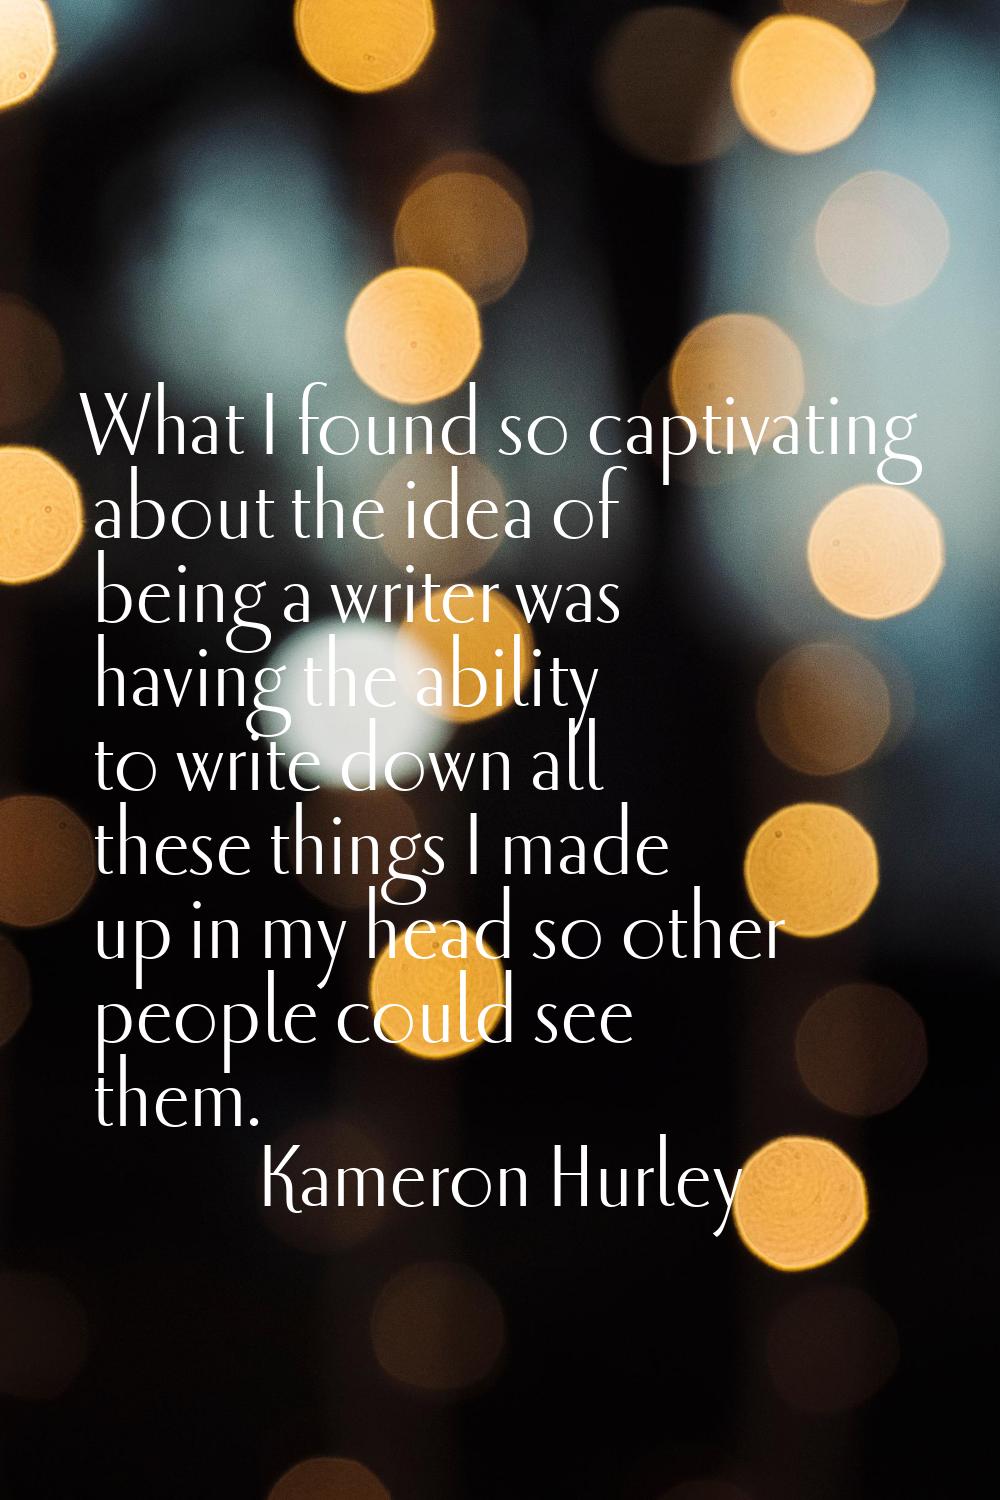 What I found so captivating about the idea of being a writer was having the ability to write down a